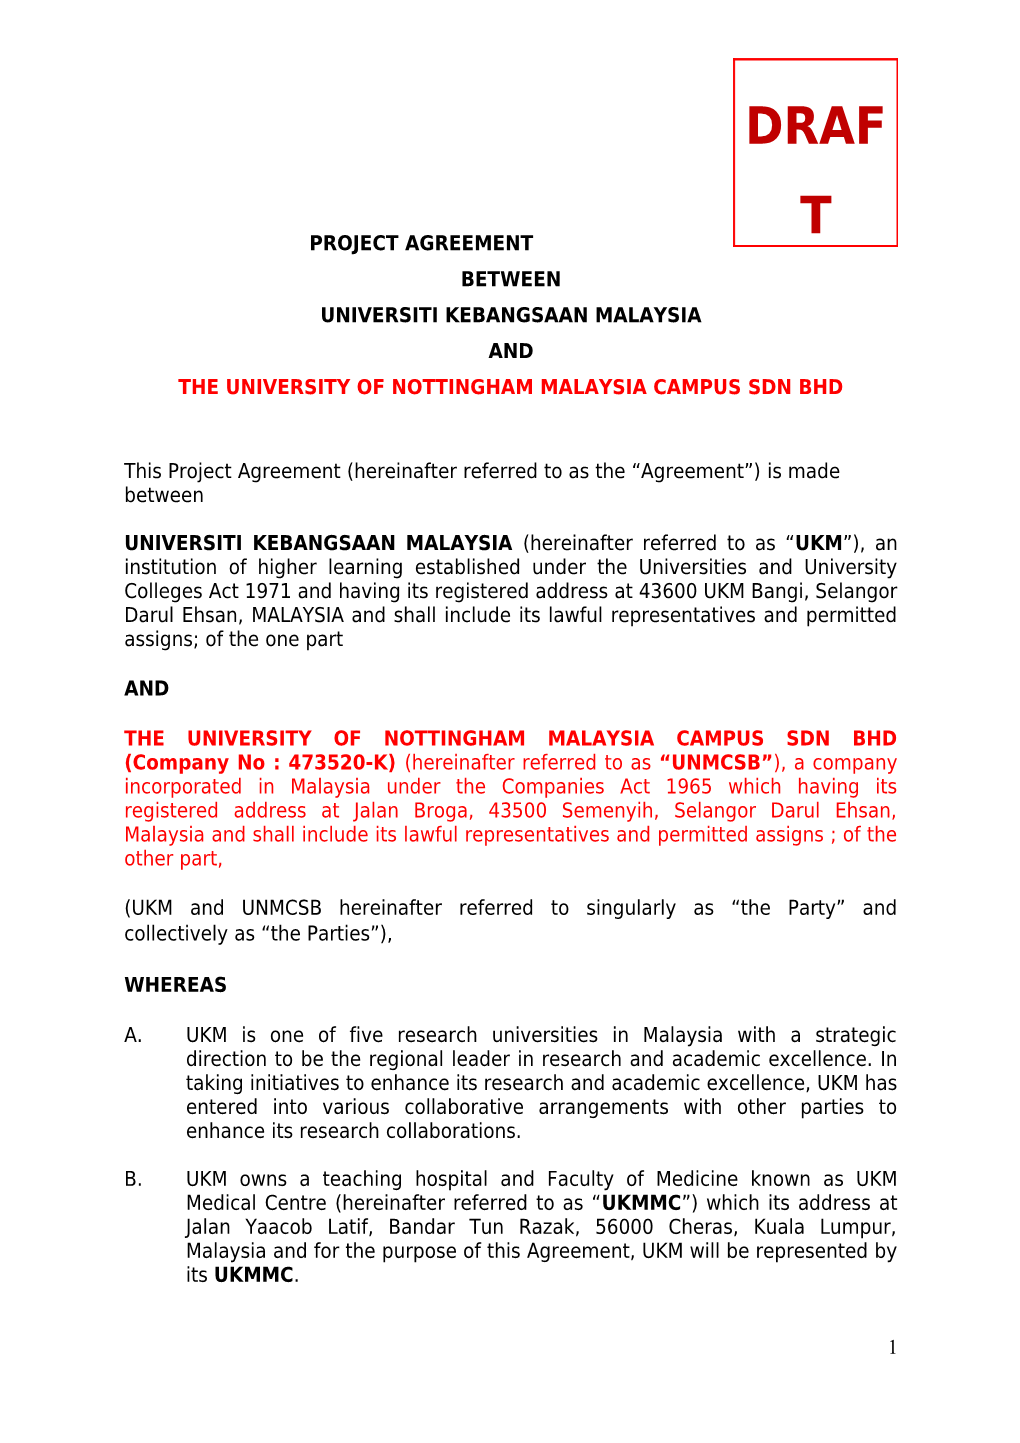 The University of Nottingham Malaysia Campus Sdn Bhd